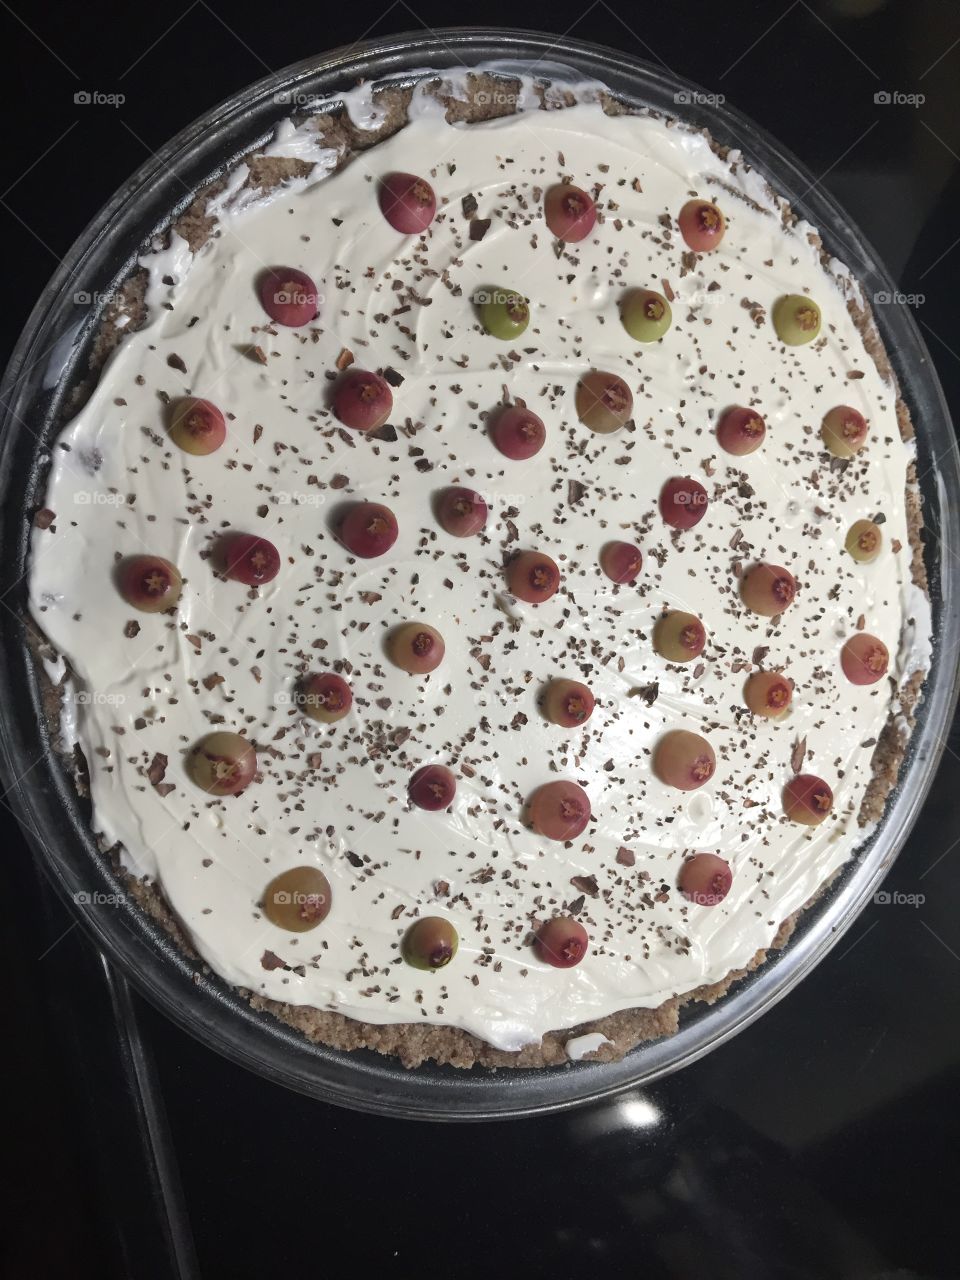 Keto cheesecake topped with pink lemonade blueberries and ground cocoa beans